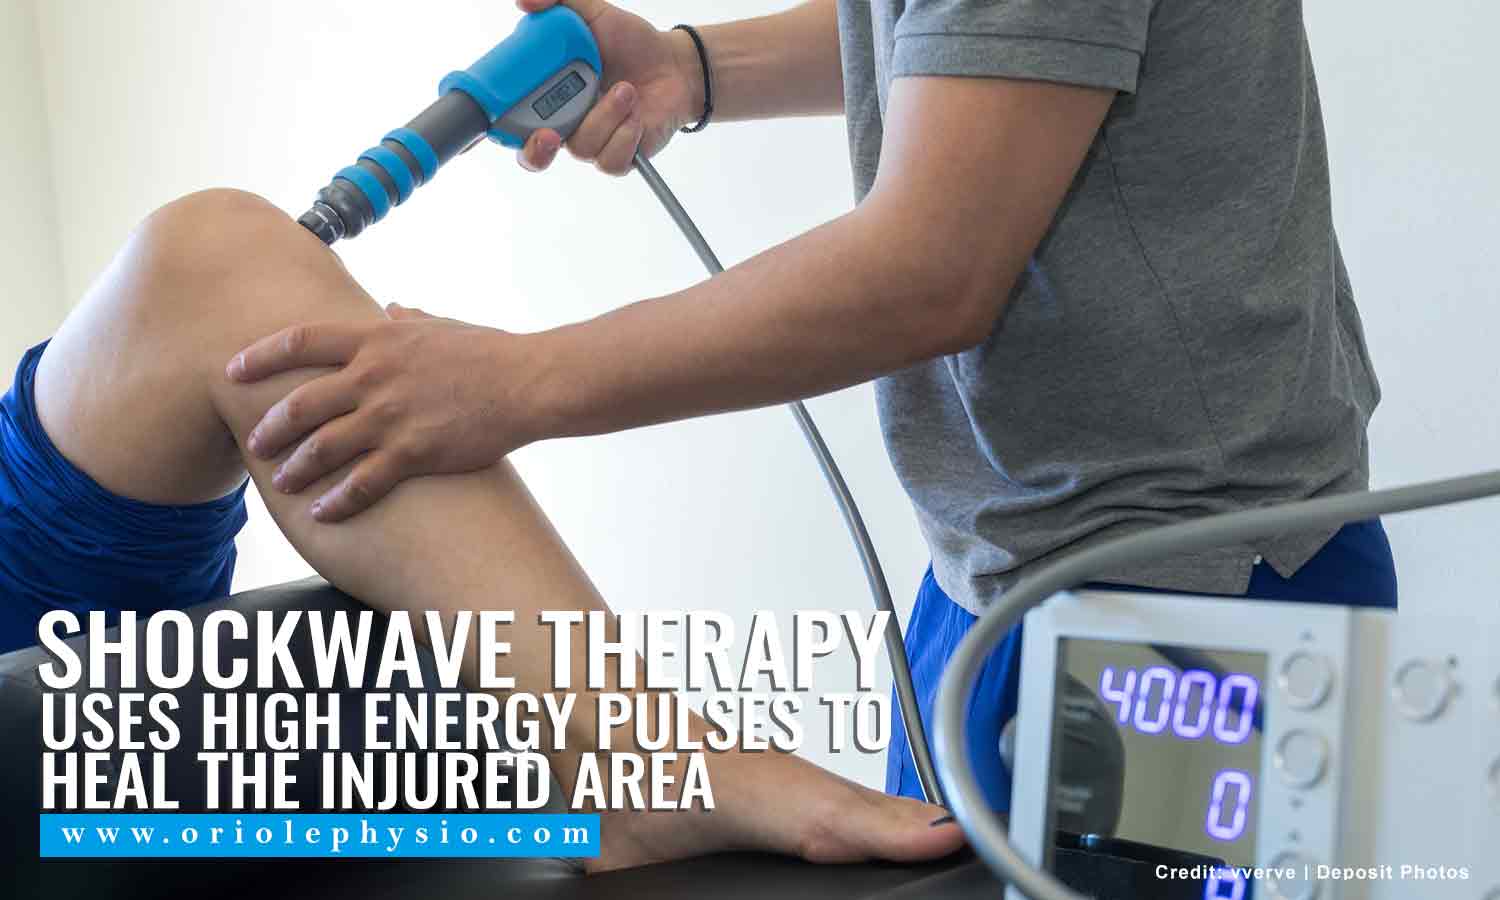 Shockwave therapy uses high energy pulses to heal the injured area